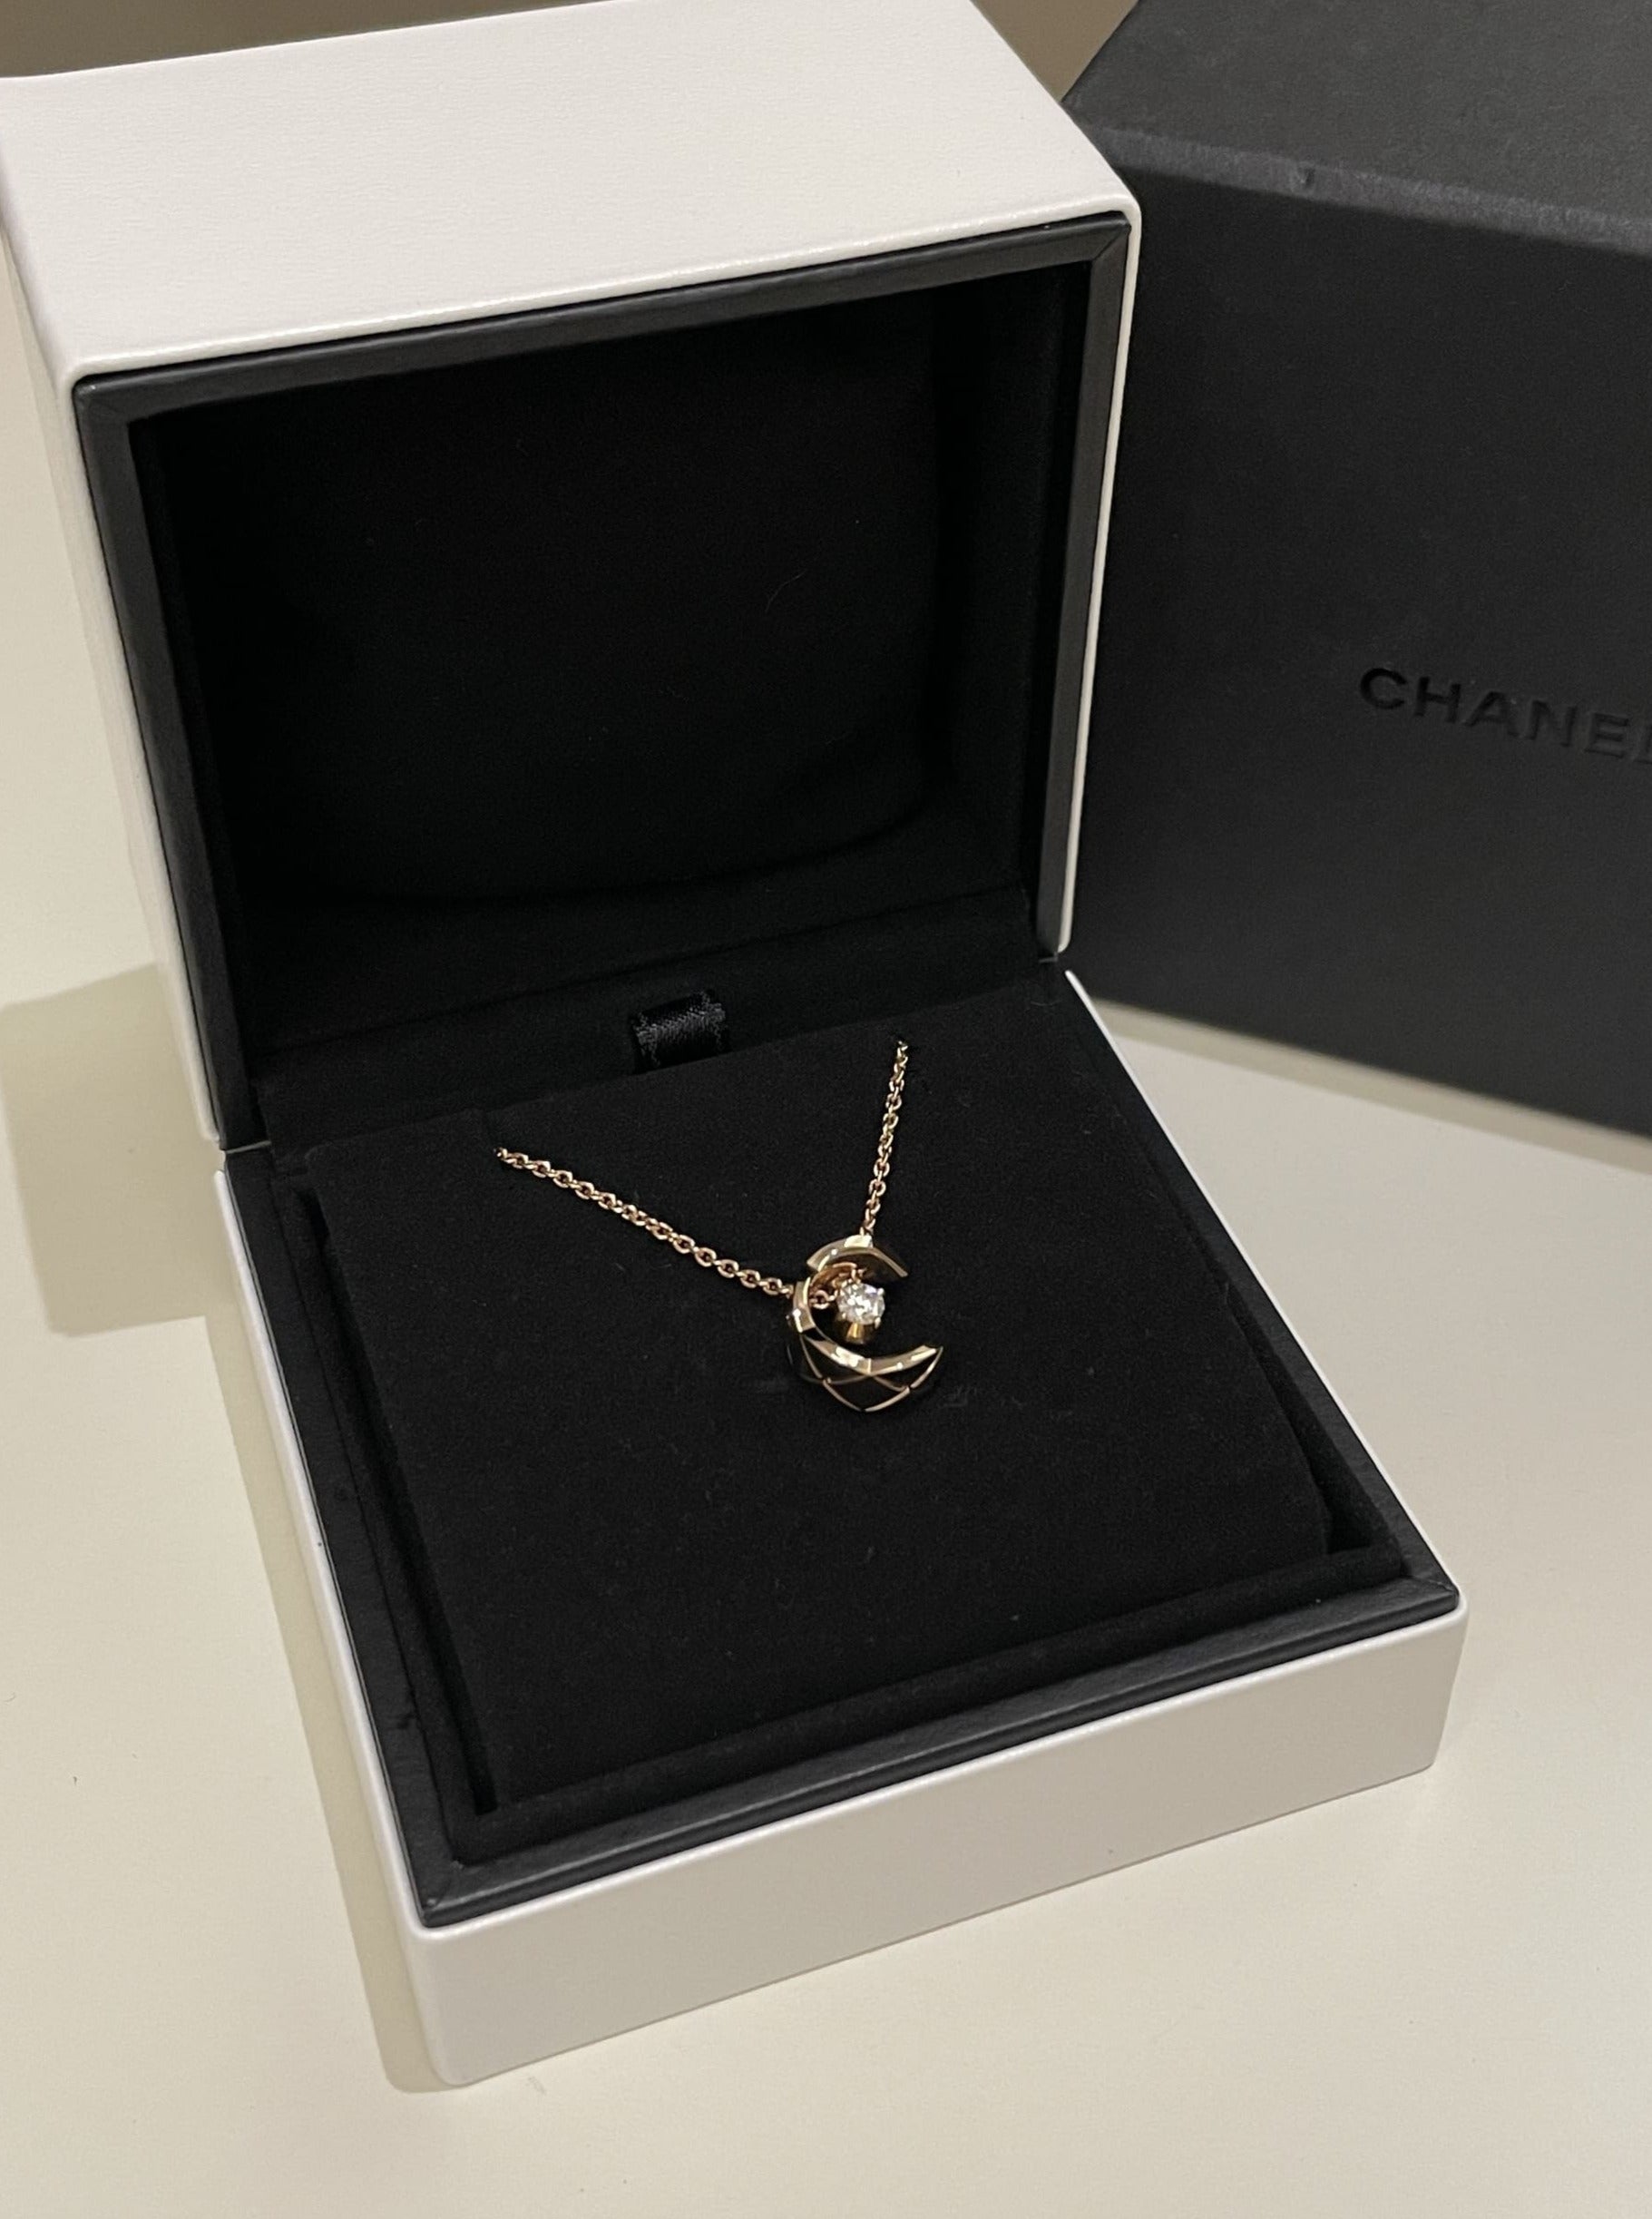 Chanel Coco Crush K18Pg Pink Gold Necklace | Chairish